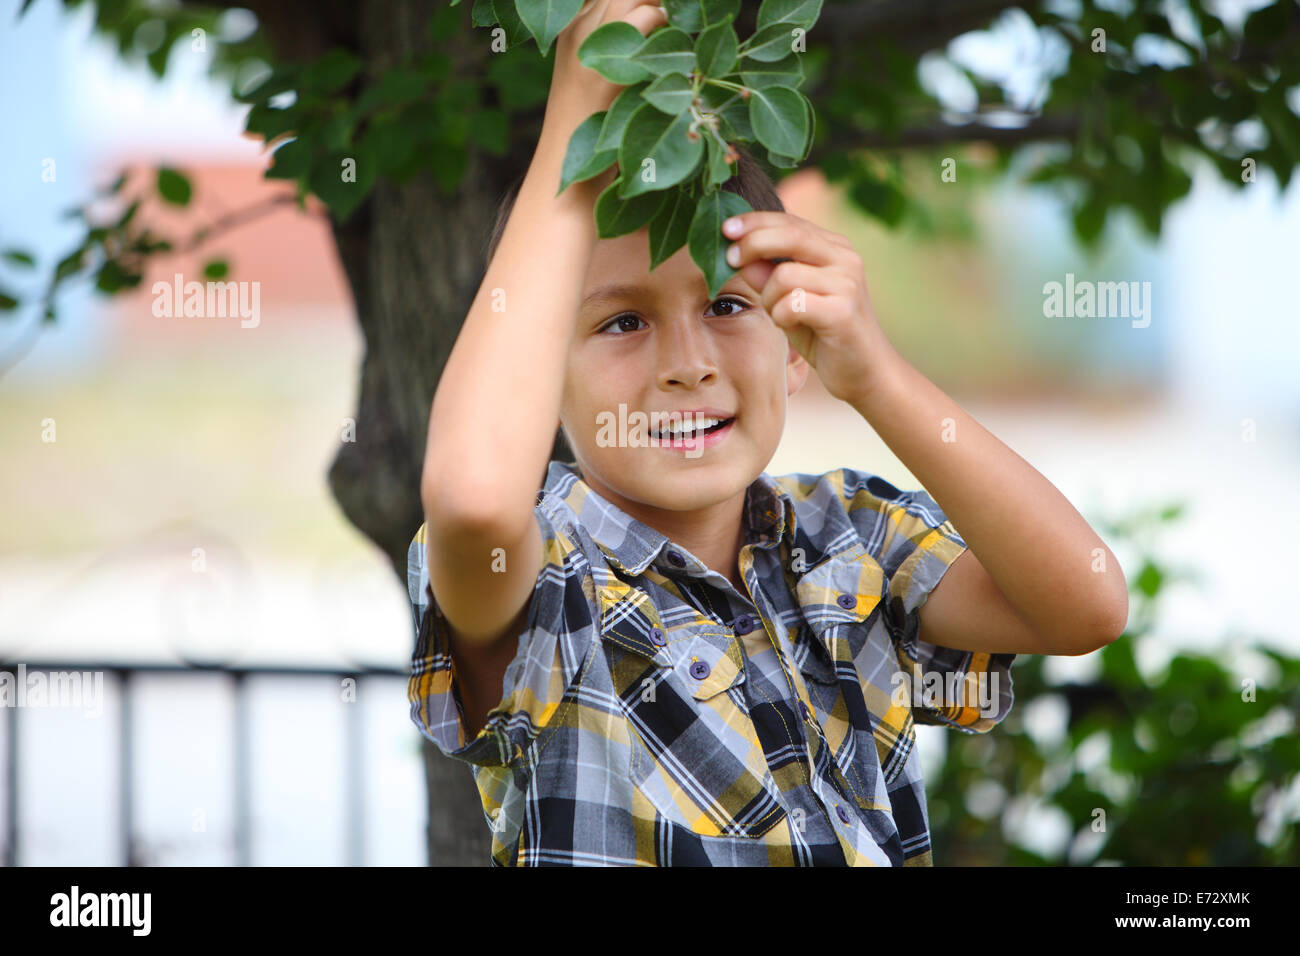 Young boy under a tree Stock Photo